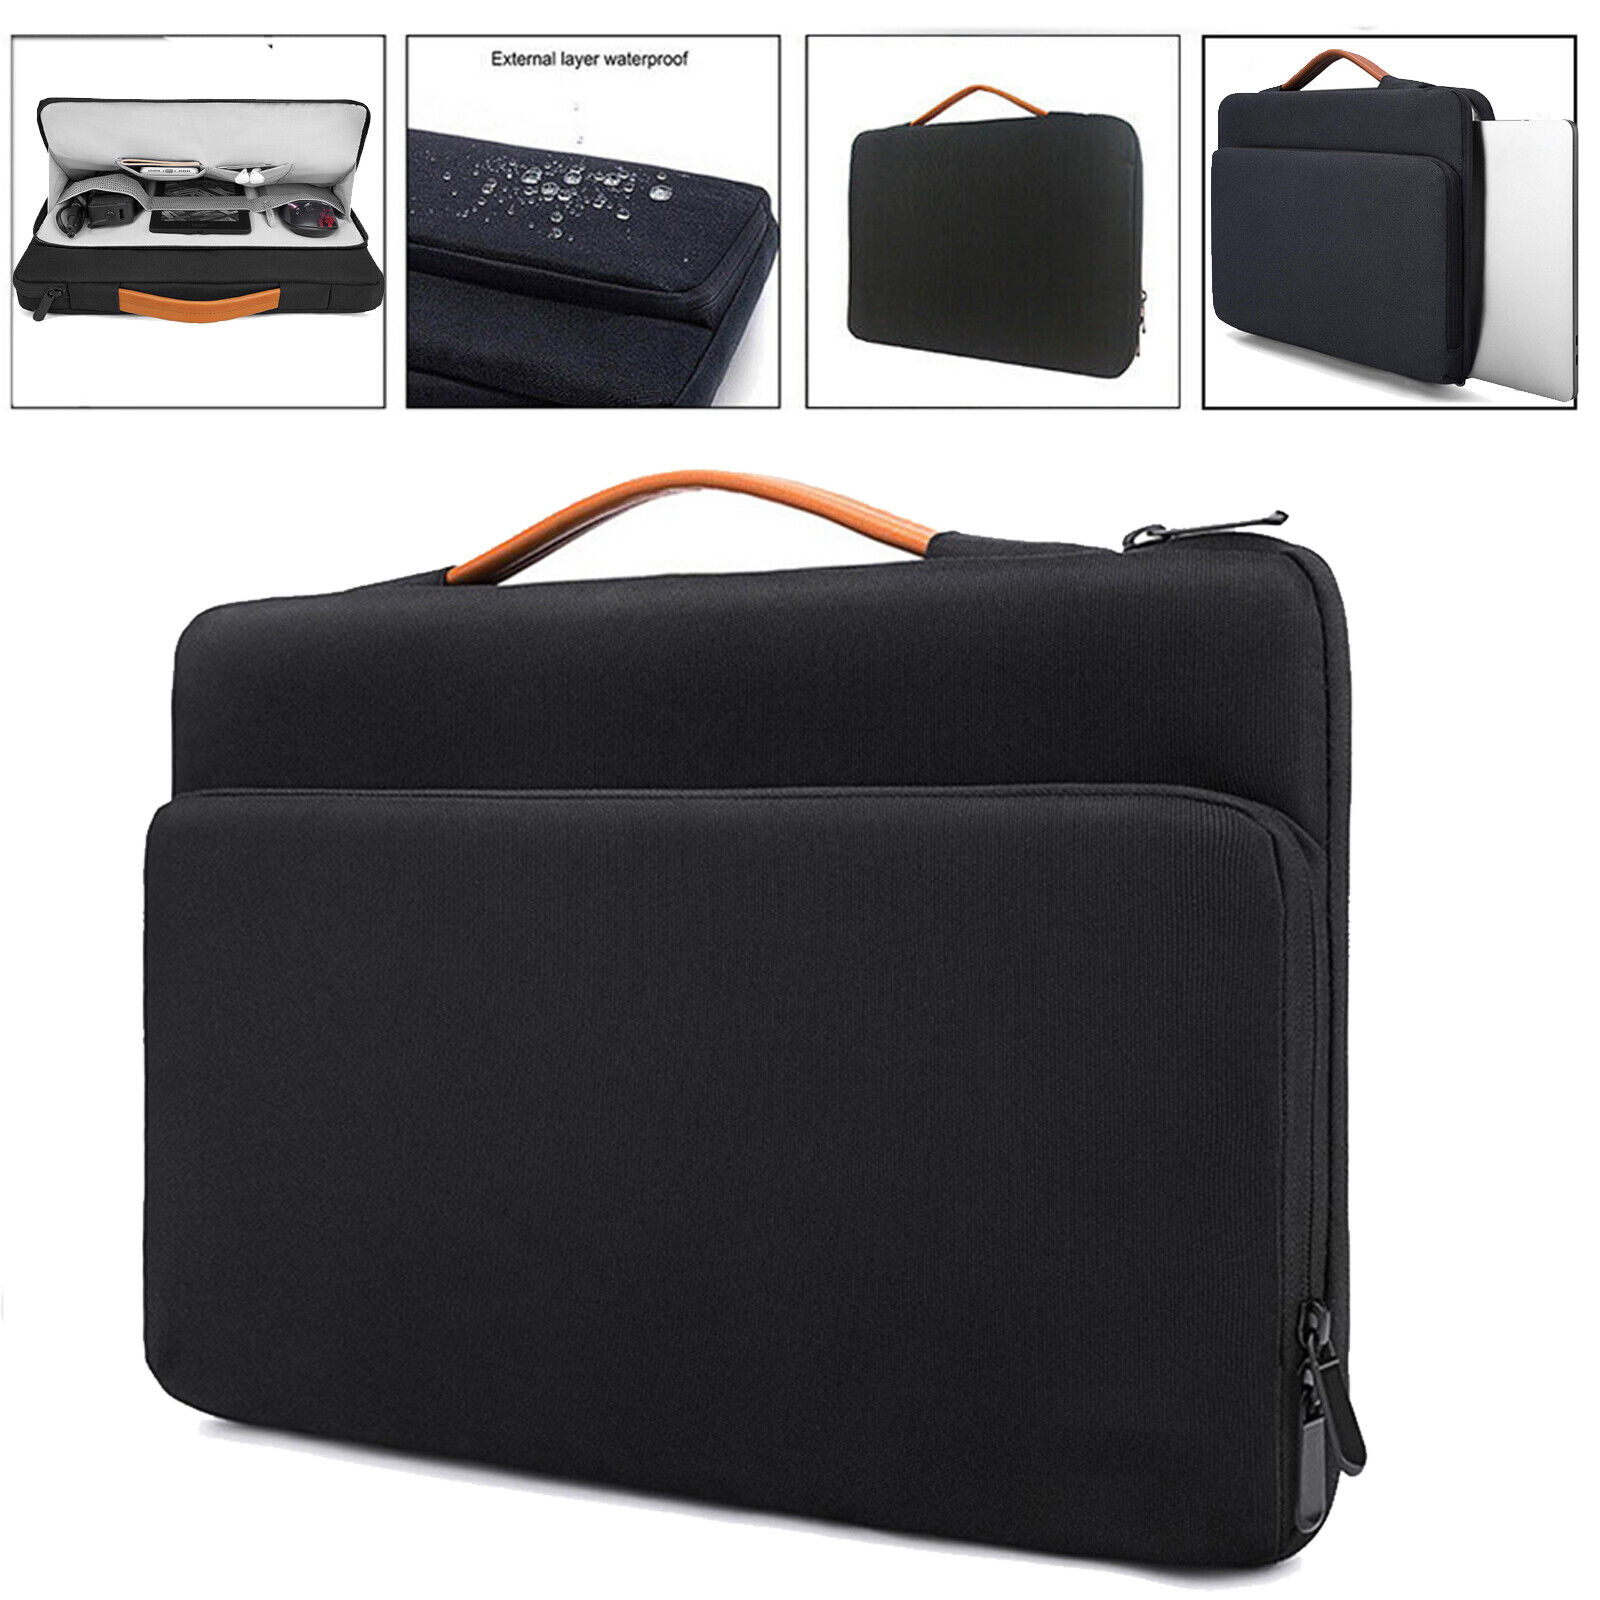 Black For 13 13.3 inch Macbook Laptop Notebook Carrying Sleeve Handbag Pouch Bag